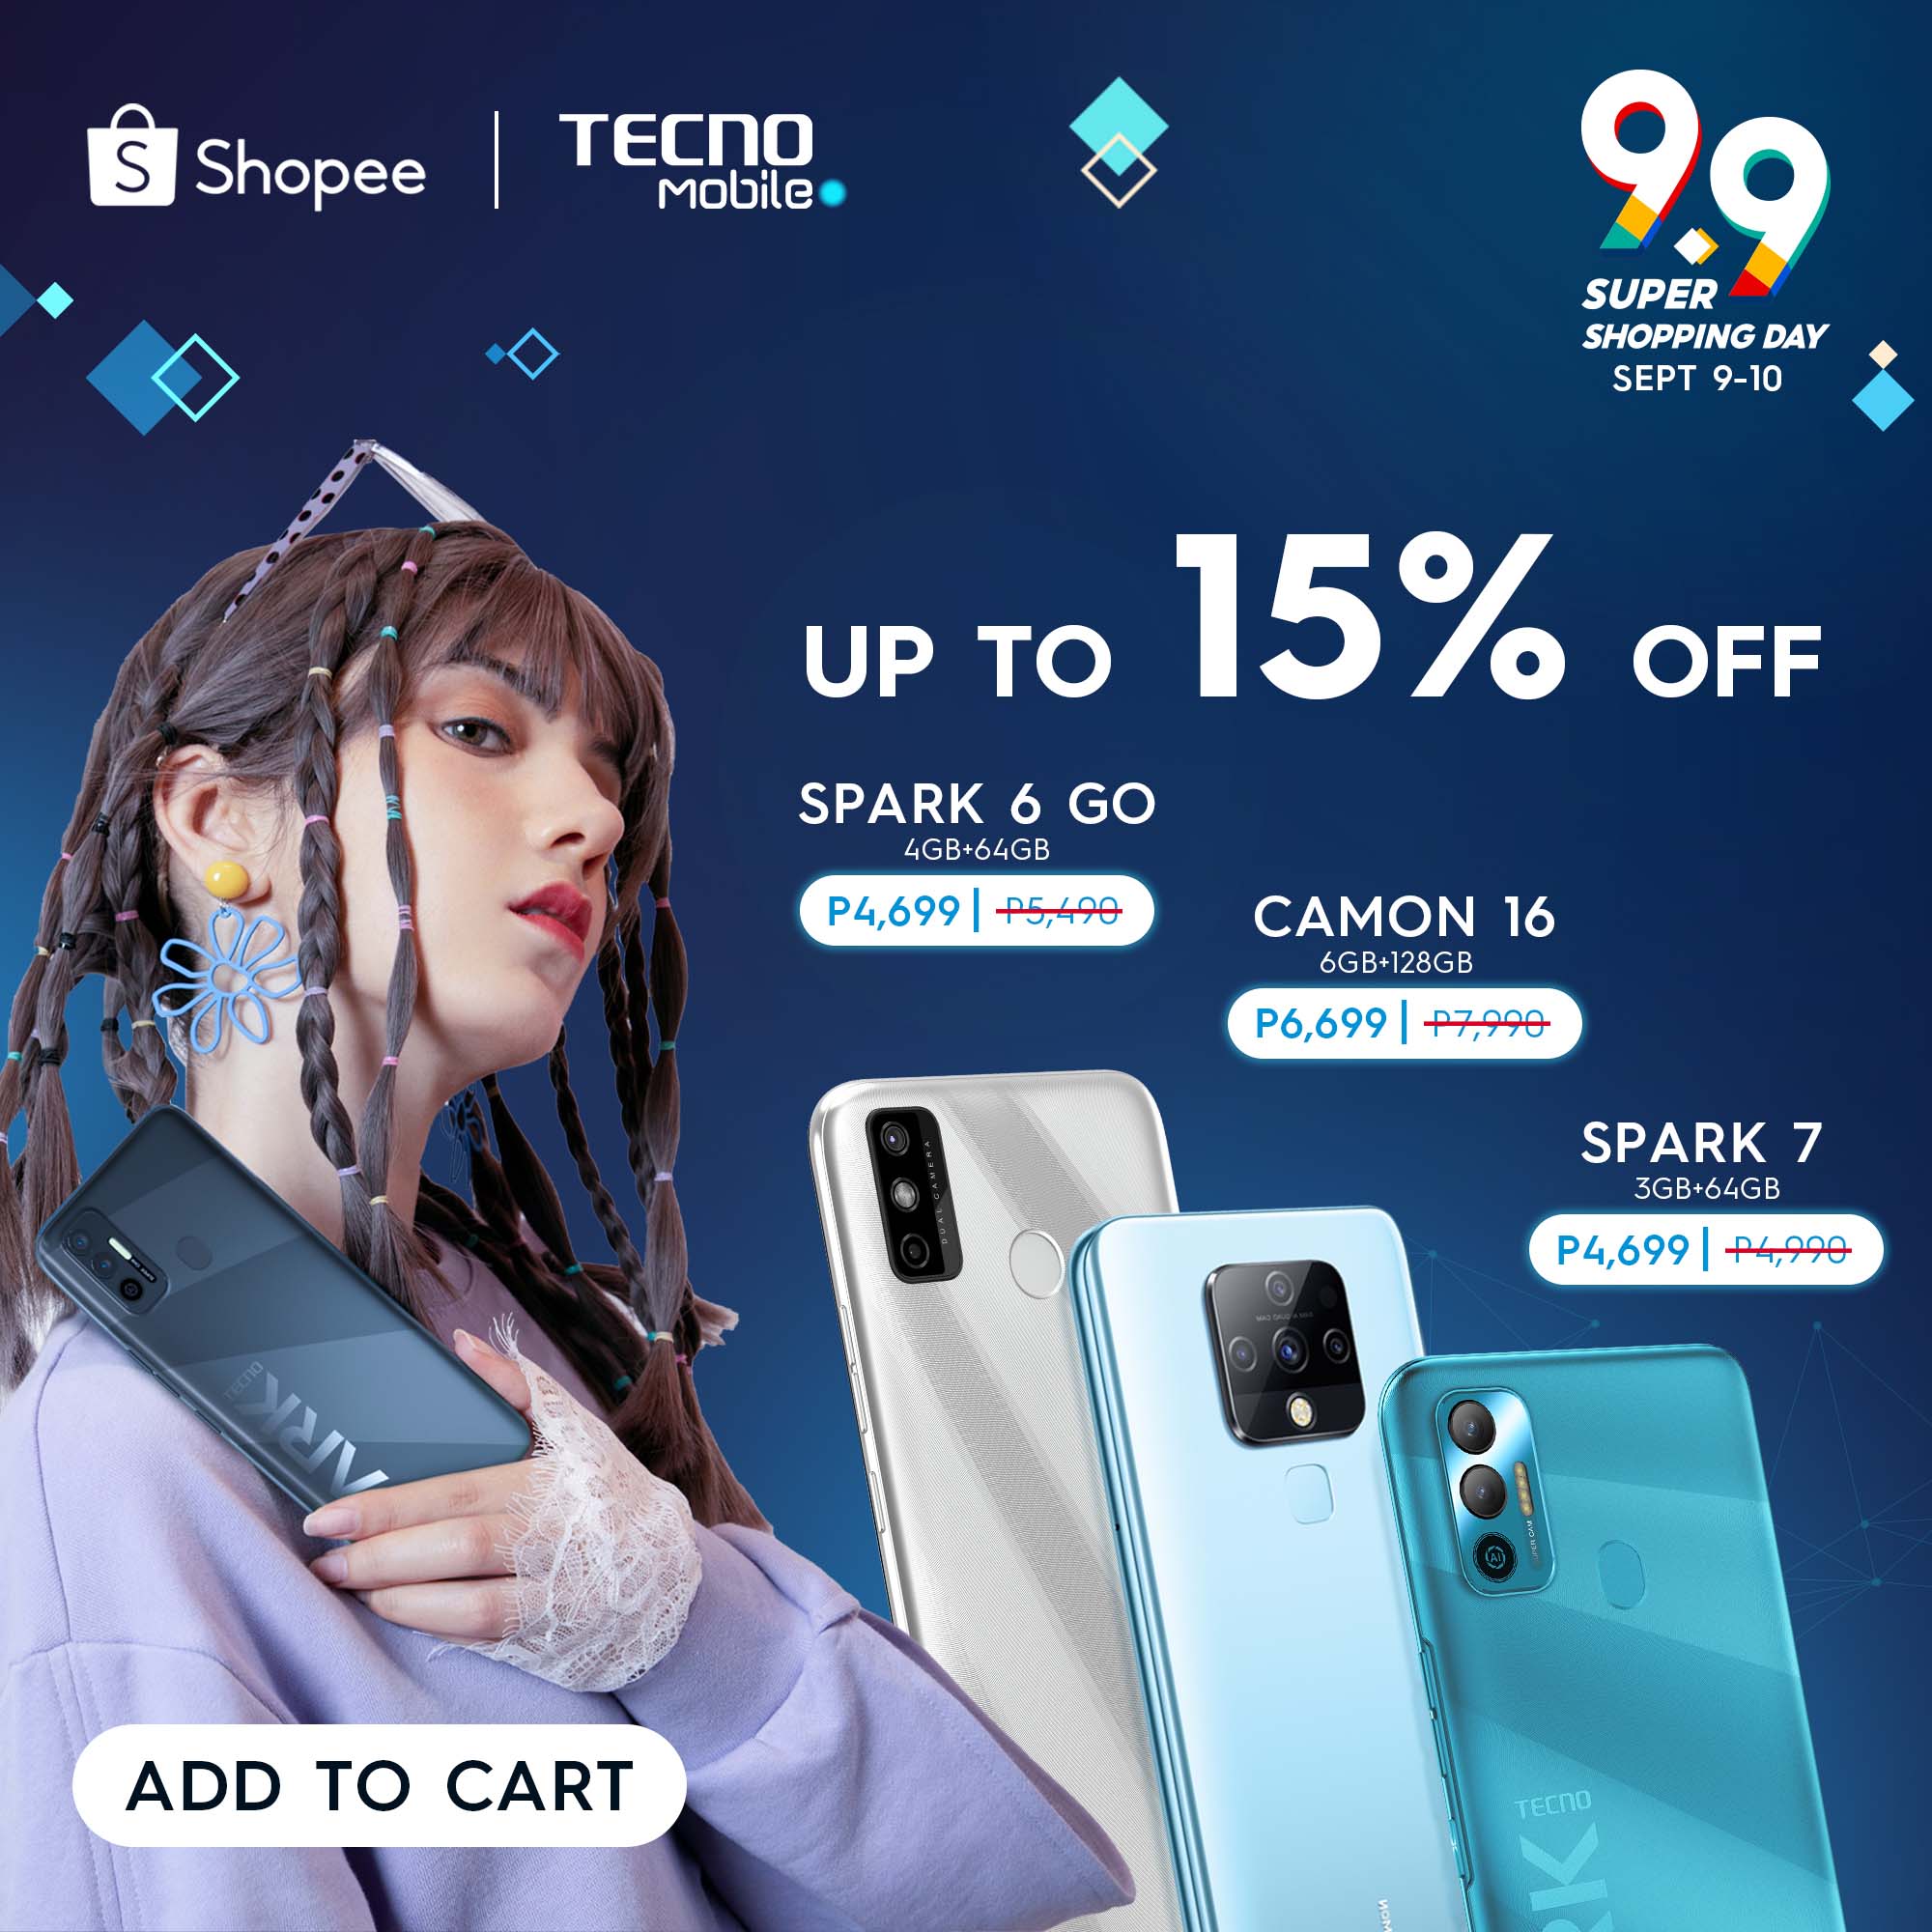 Check Out These 9.9 Offers From TECNO Mobile on September 9th!